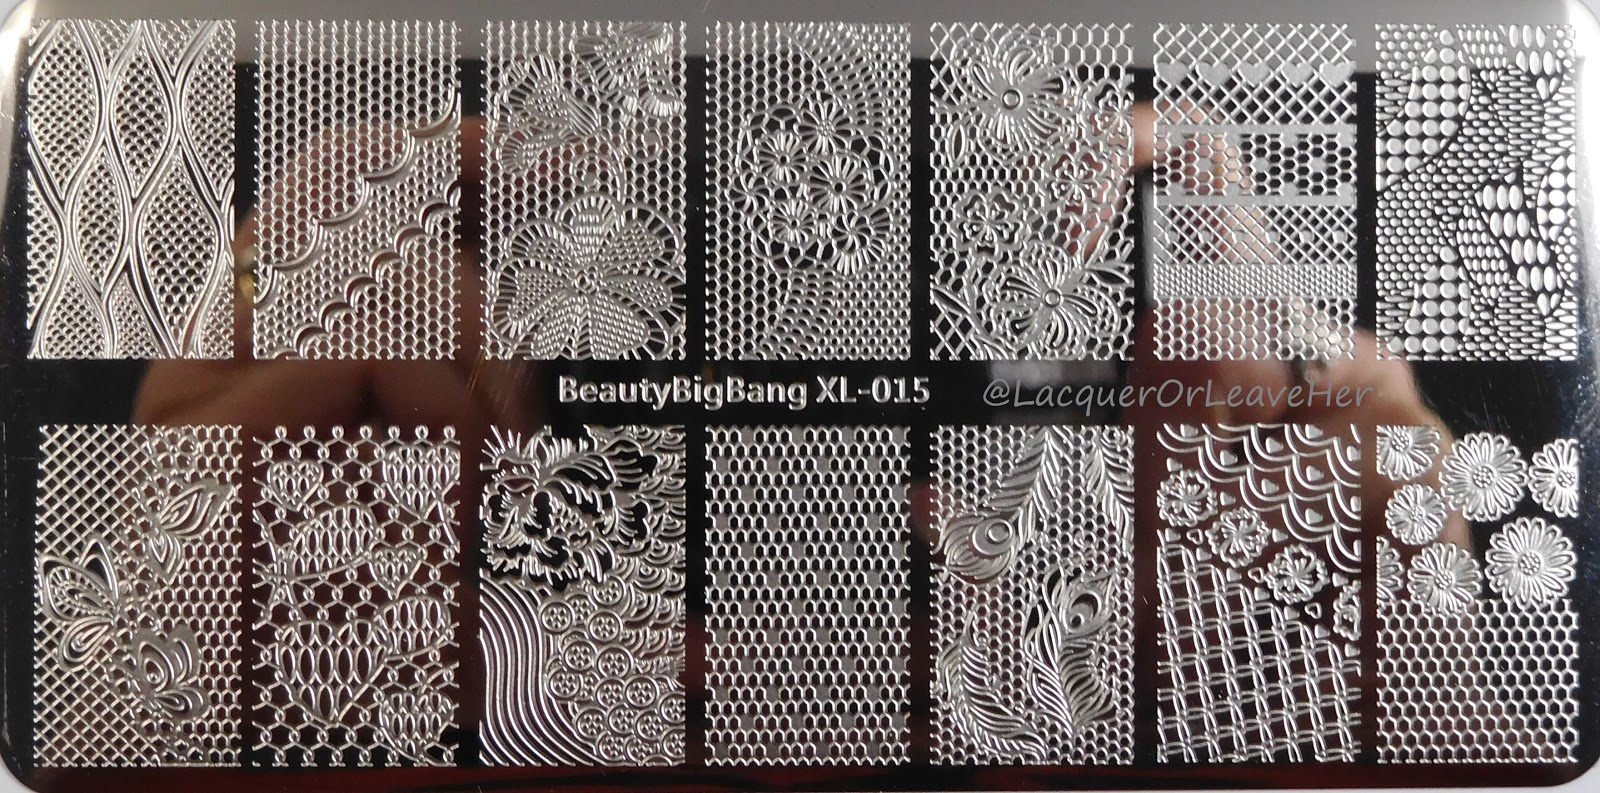 Review of Beauty Big Bang BBBXL-030 Stamping Plate